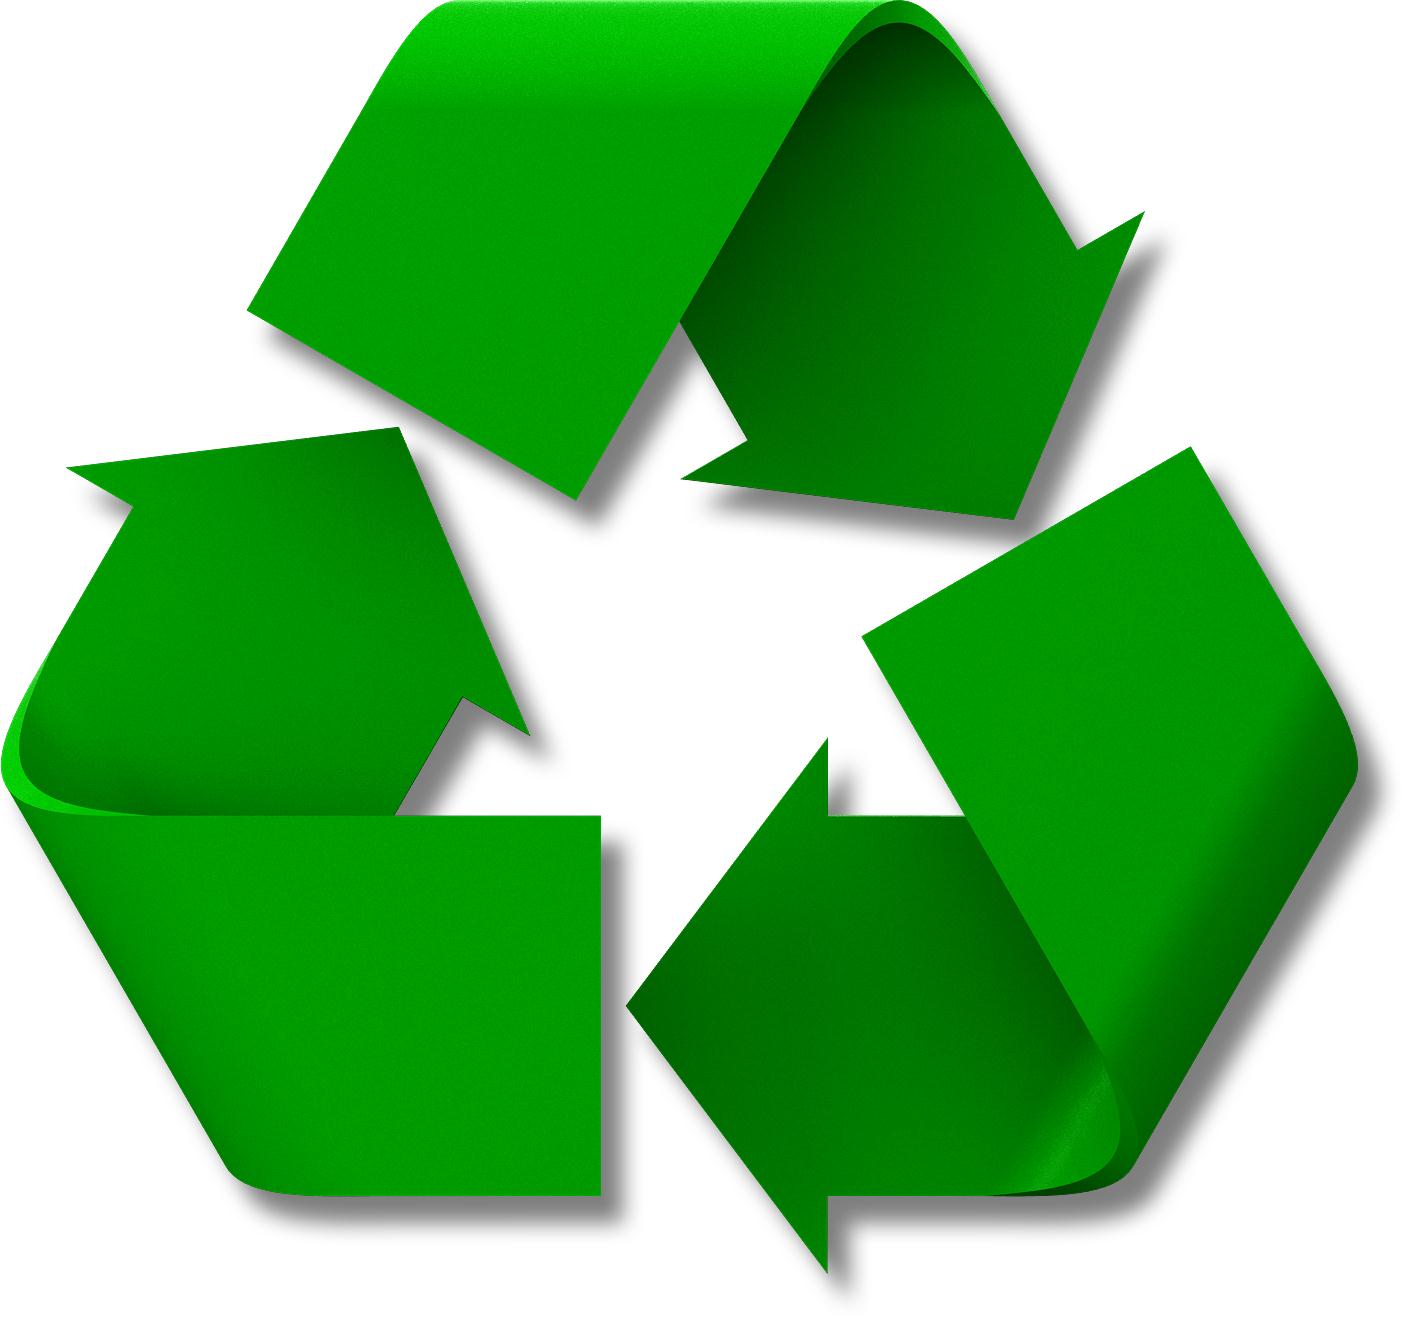 Recycle Bin Pictures - ClipArt Best